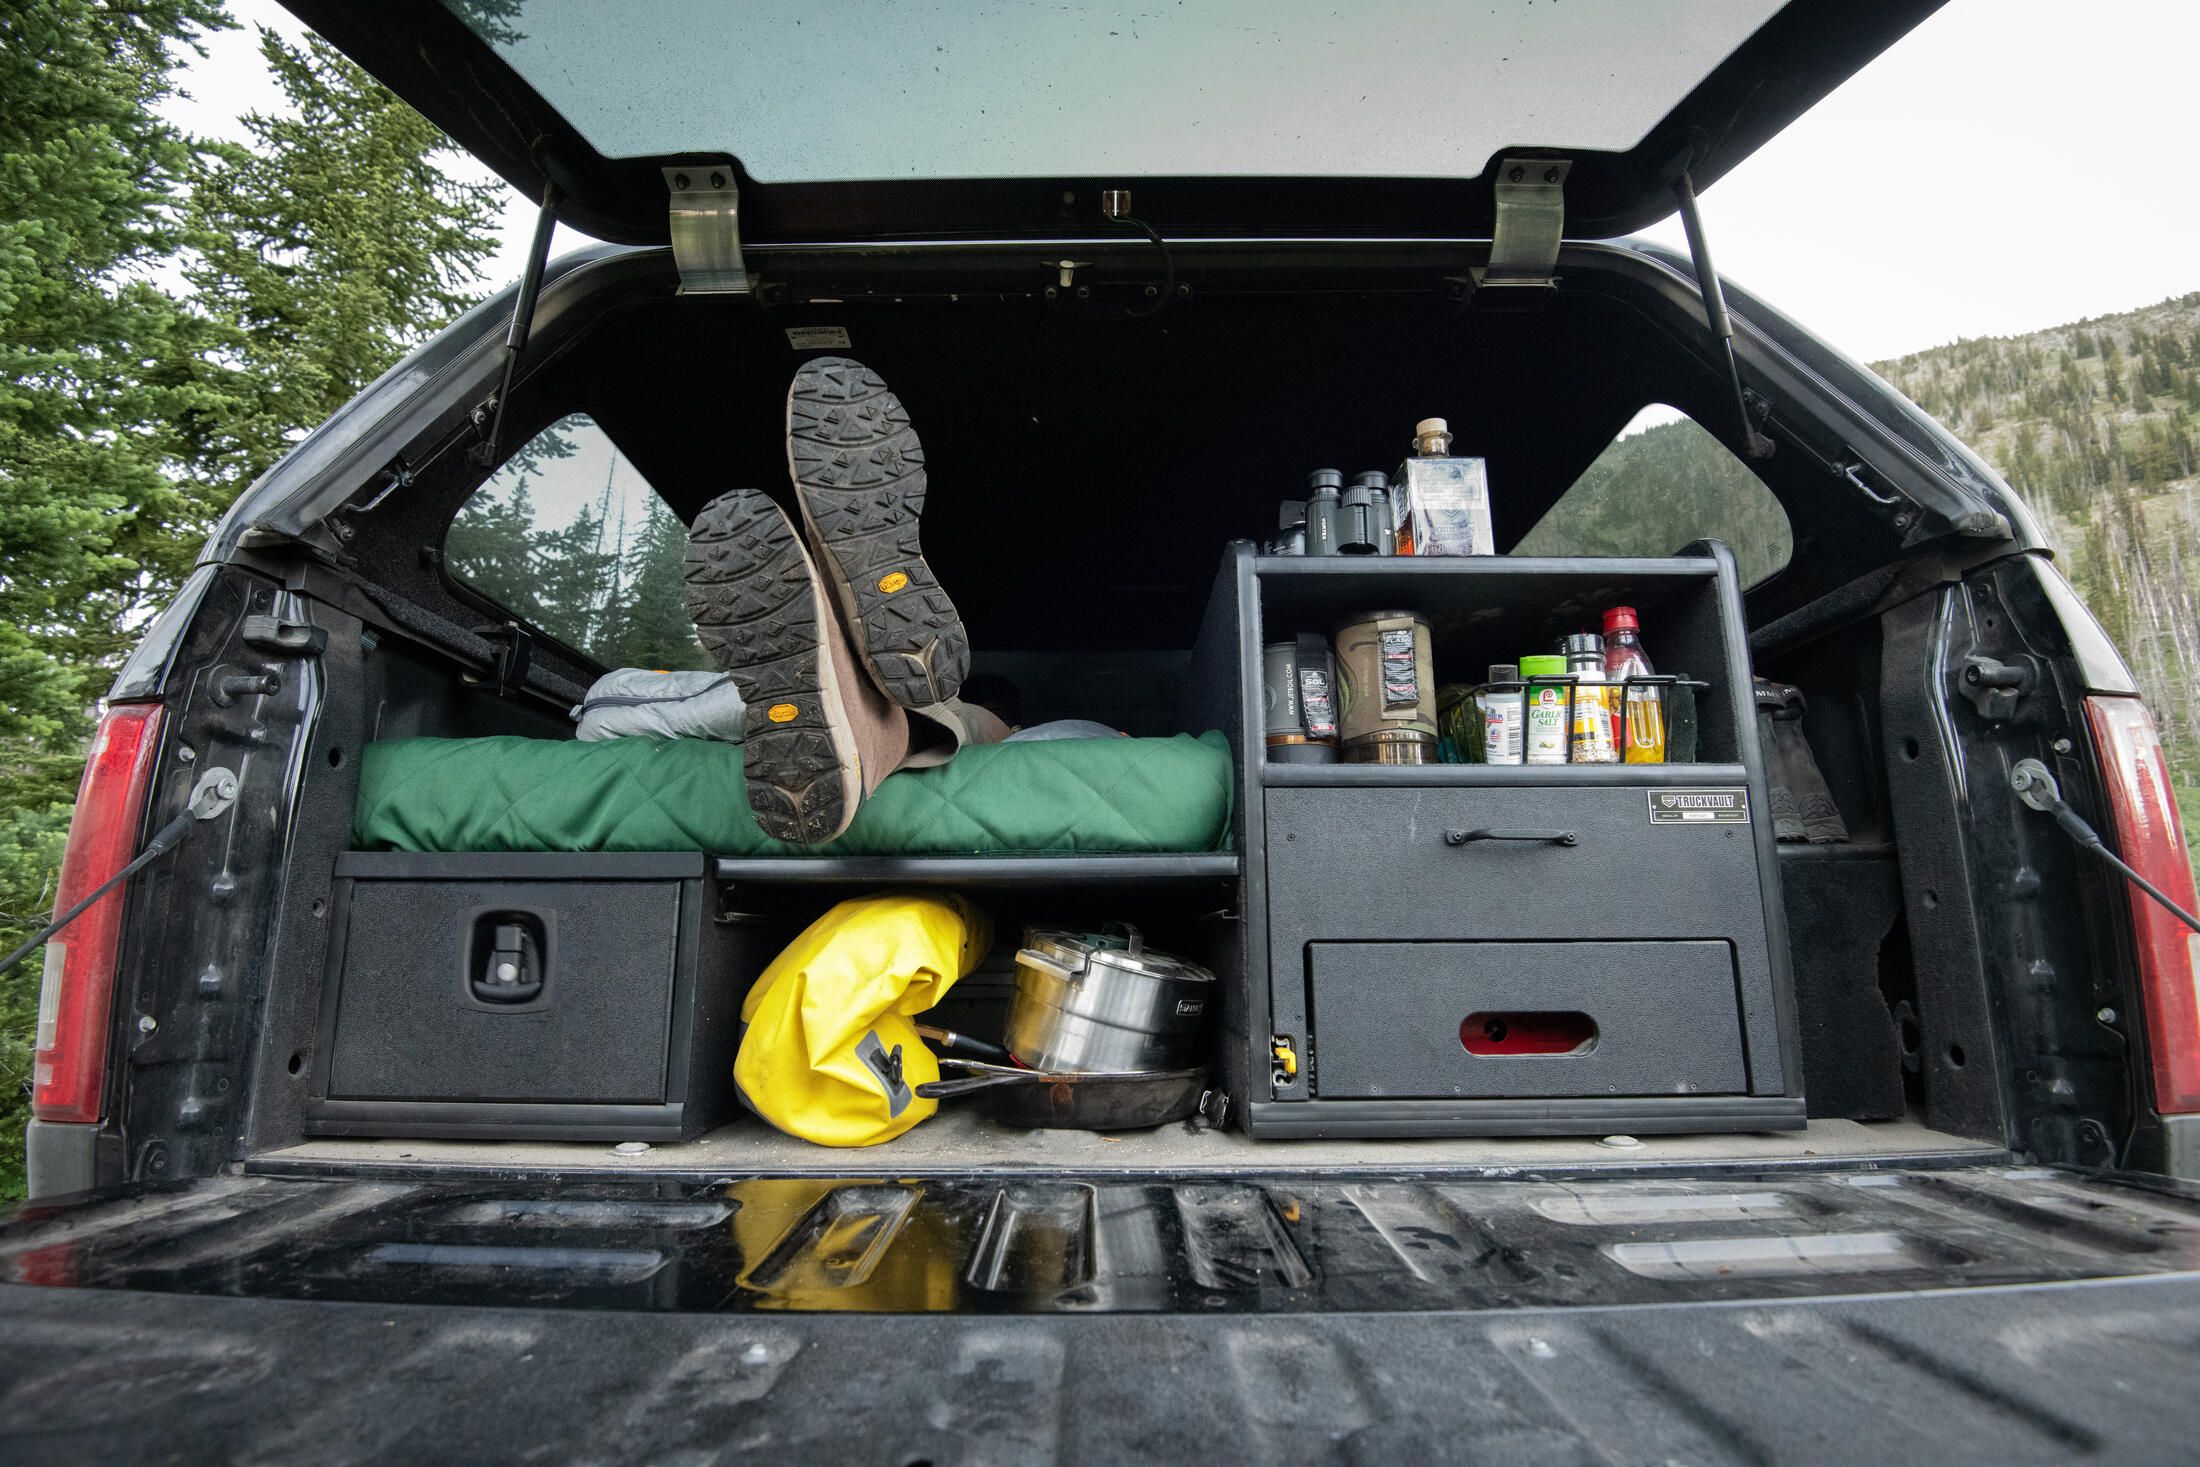 Underbody Tool Boxes for Off-Road Camping and Overlanding